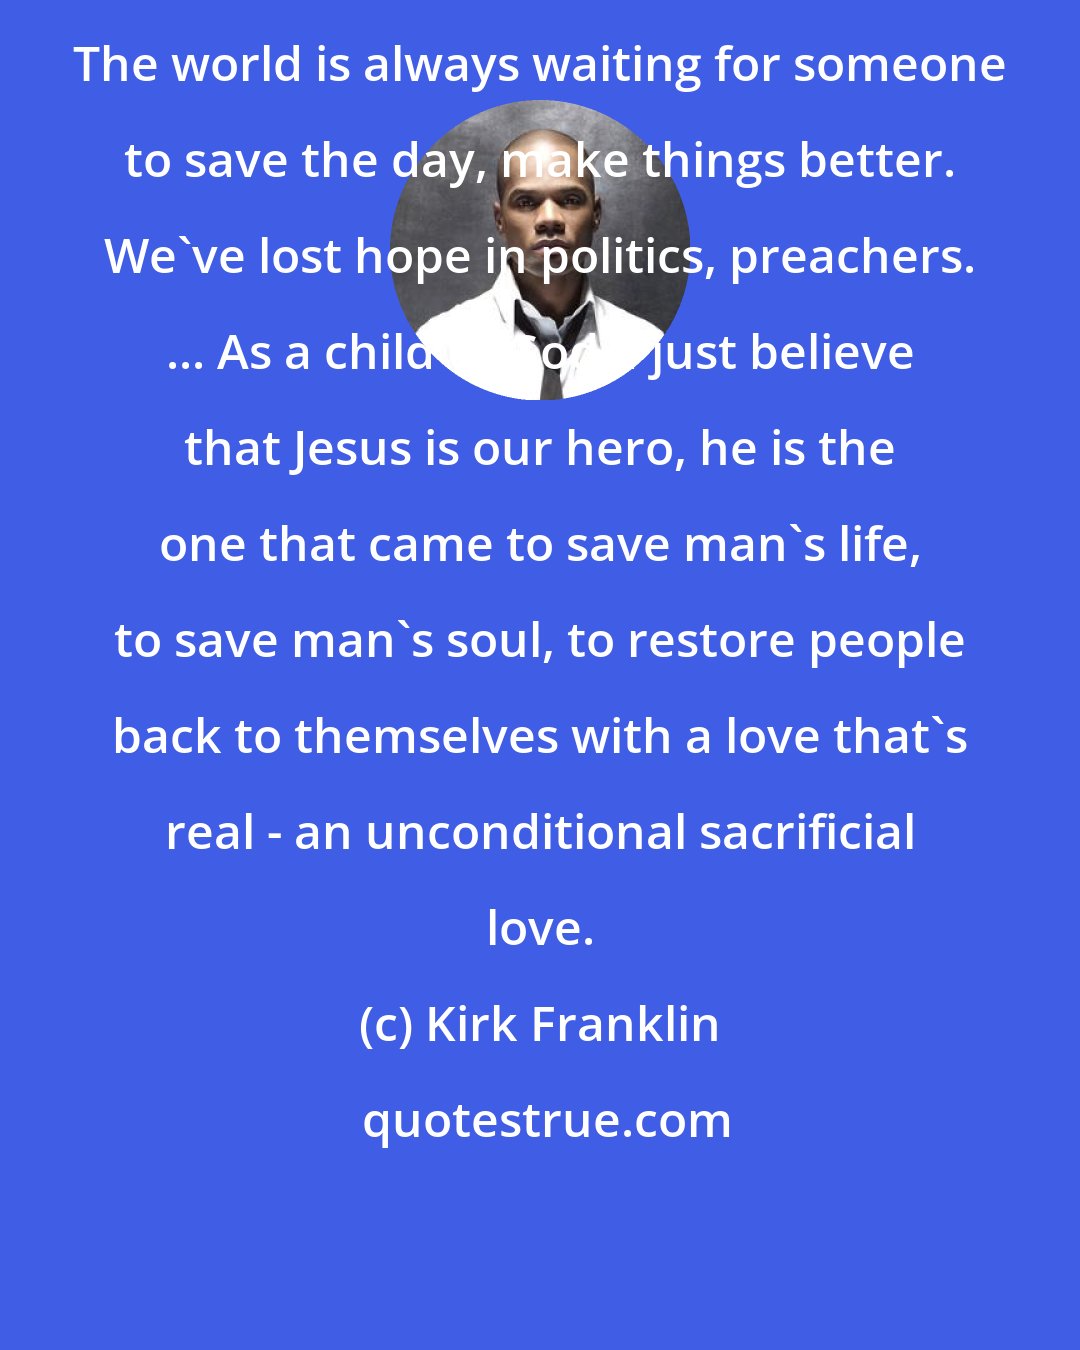 Kirk Franklin: The world is always waiting for someone to save the day, make things better. We've lost hope in politics, preachers. ... As a child of God, I just believe that Jesus is our hero, he is the one that came to save man's life, to save man's soul, to restore people back to themselves with a love that's real - an unconditional sacrificial love.